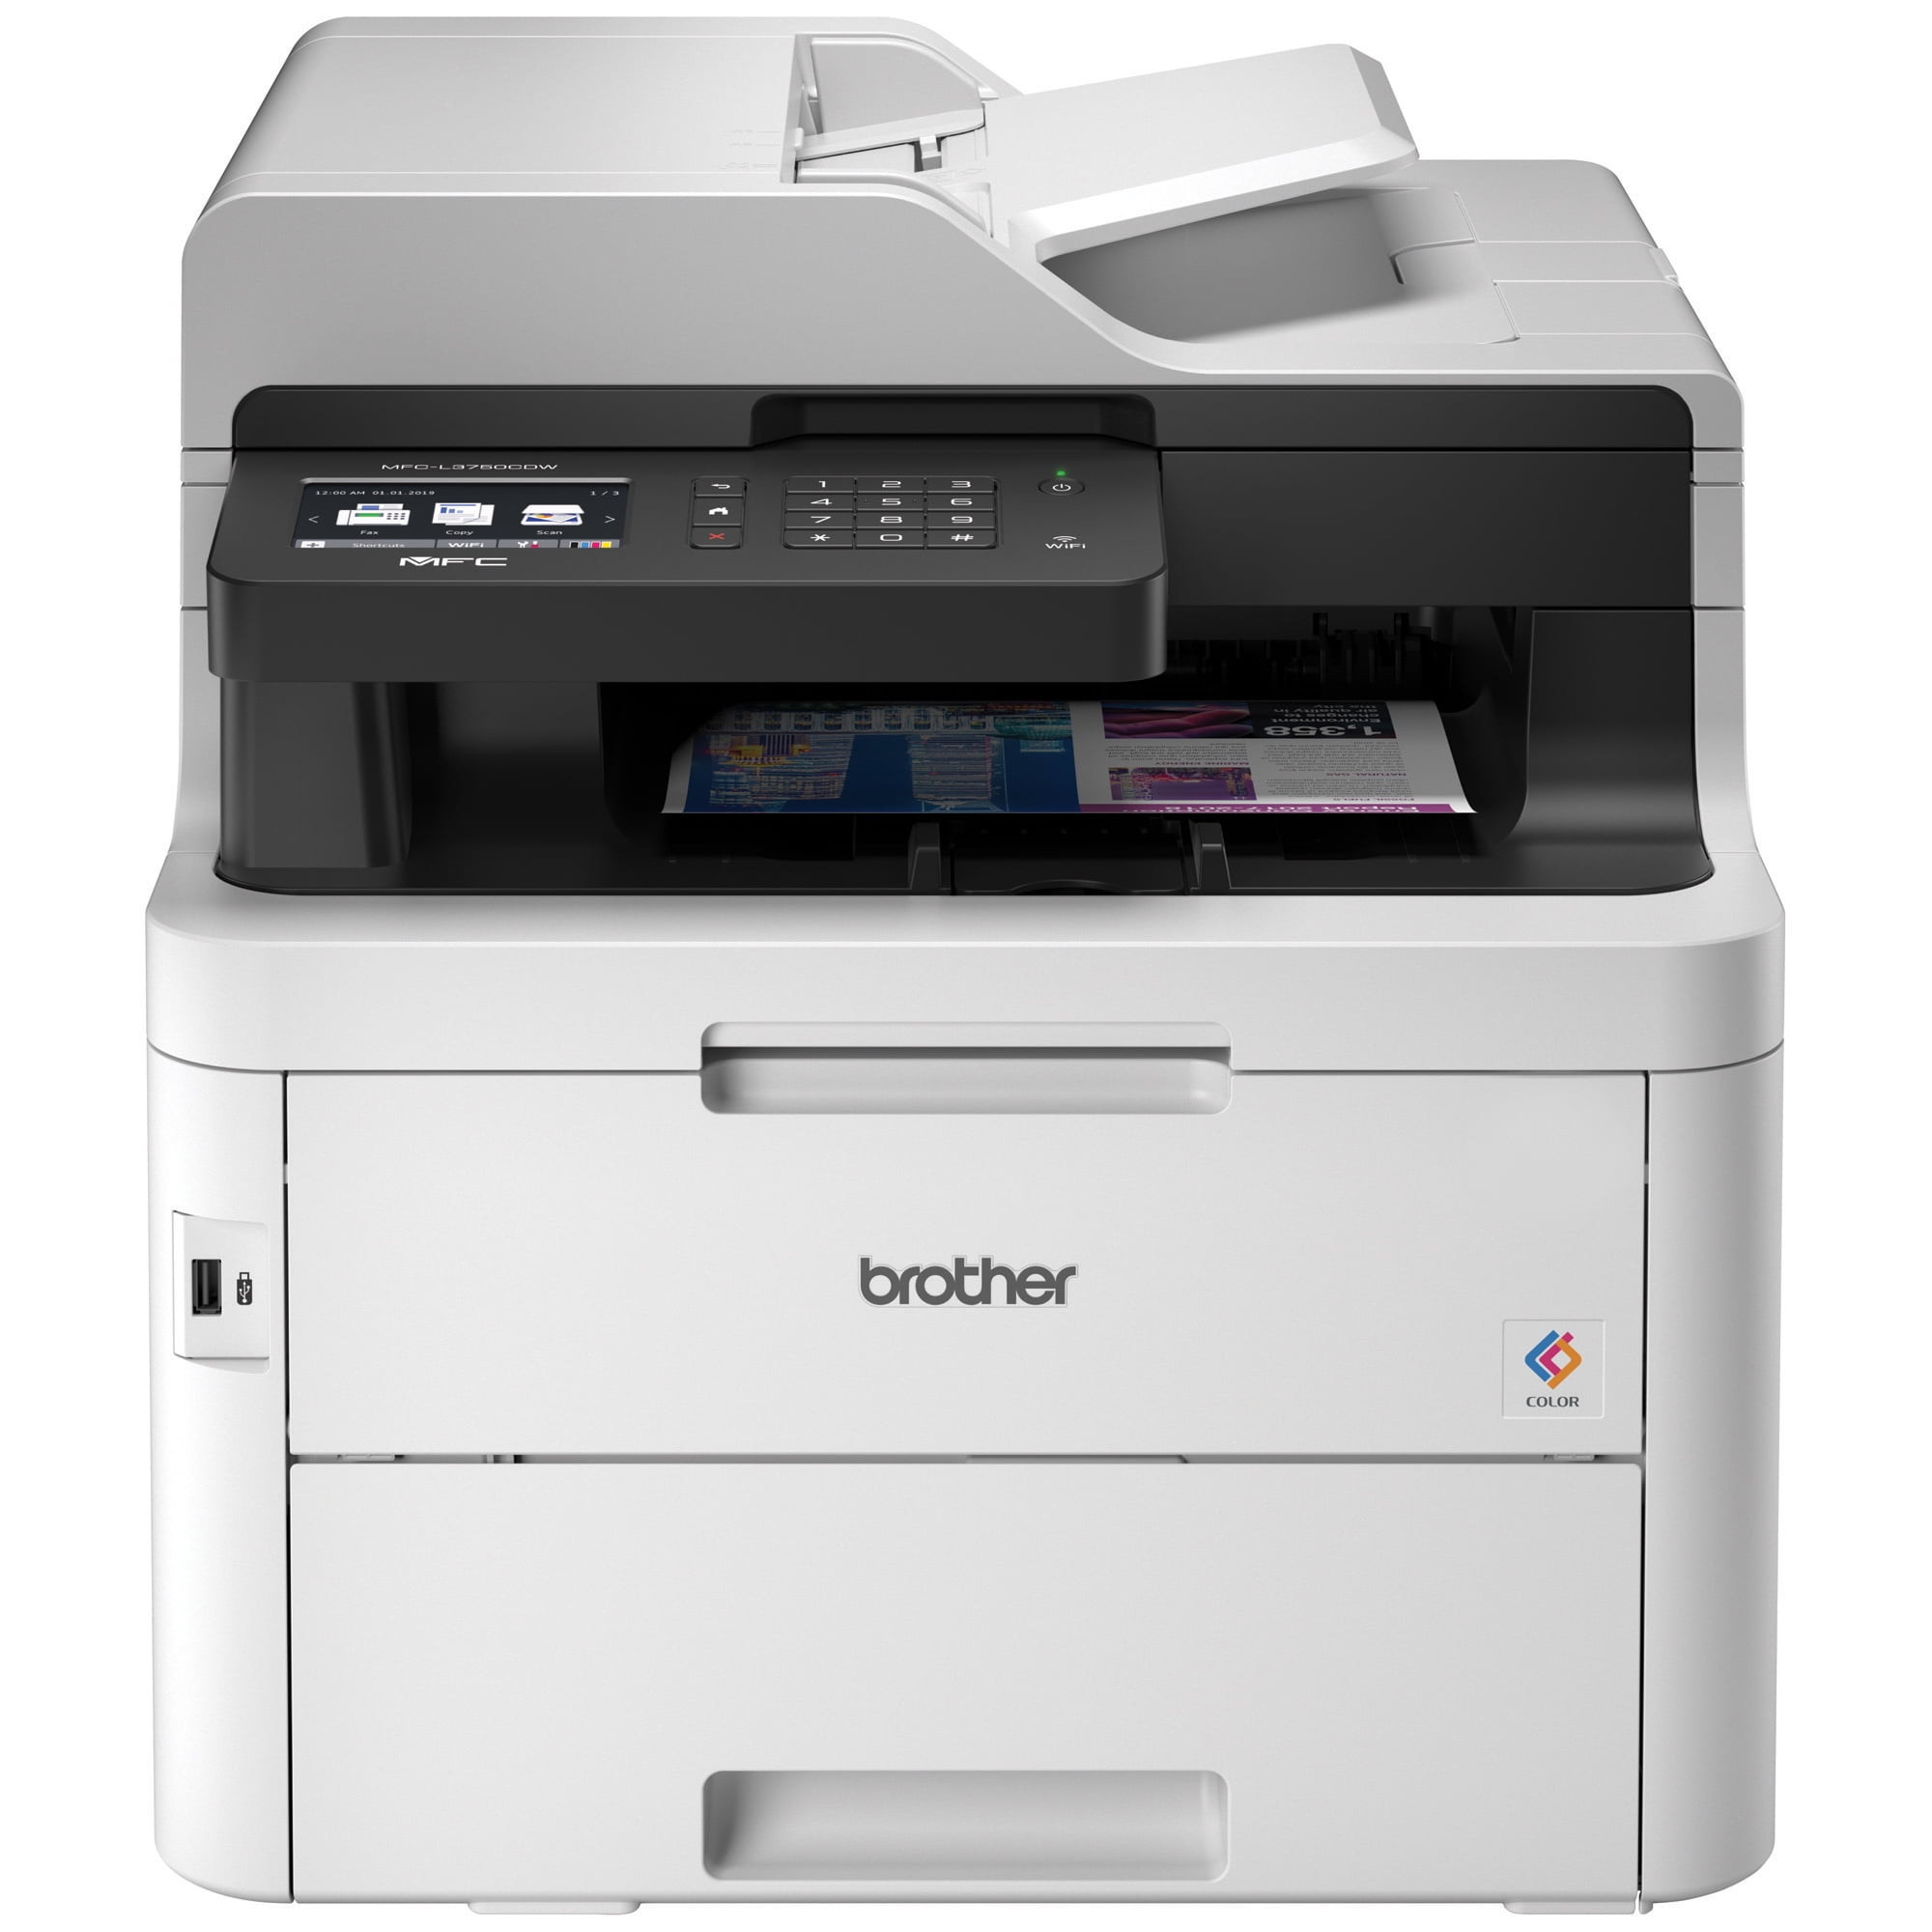 Sobriquette Psychiatrie Vrijgekomen Brother MFC-L3750CDW Compact Digital Color All-in-One Printer, 3.7” Color  Touchscreen, Wireless and Duplex Printing - Walmart.com